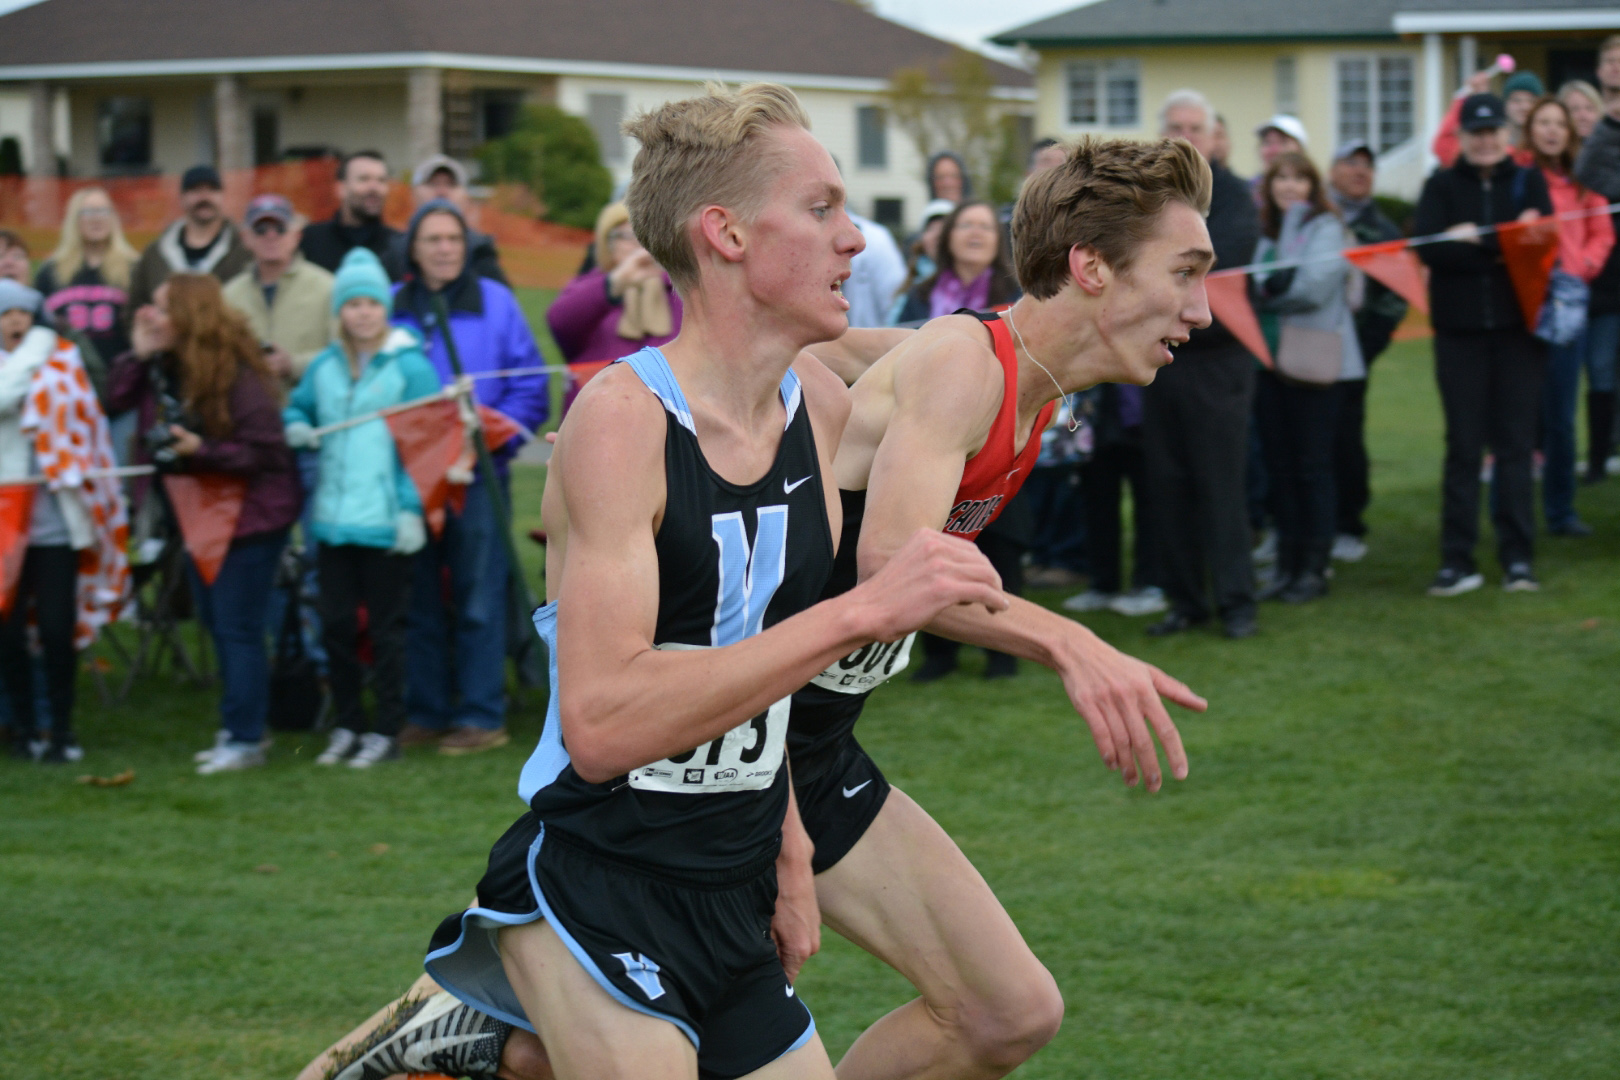 Daniel Maton of Camas, right, and Ryan Kline of Central Valley in Spokane, fight to the finish line. Maton tumbled and Kline captured the 4A boys state cross country championship in 15 minutes, 11 seconds on Saturday, Nov. 5, 2017, at Pasco.